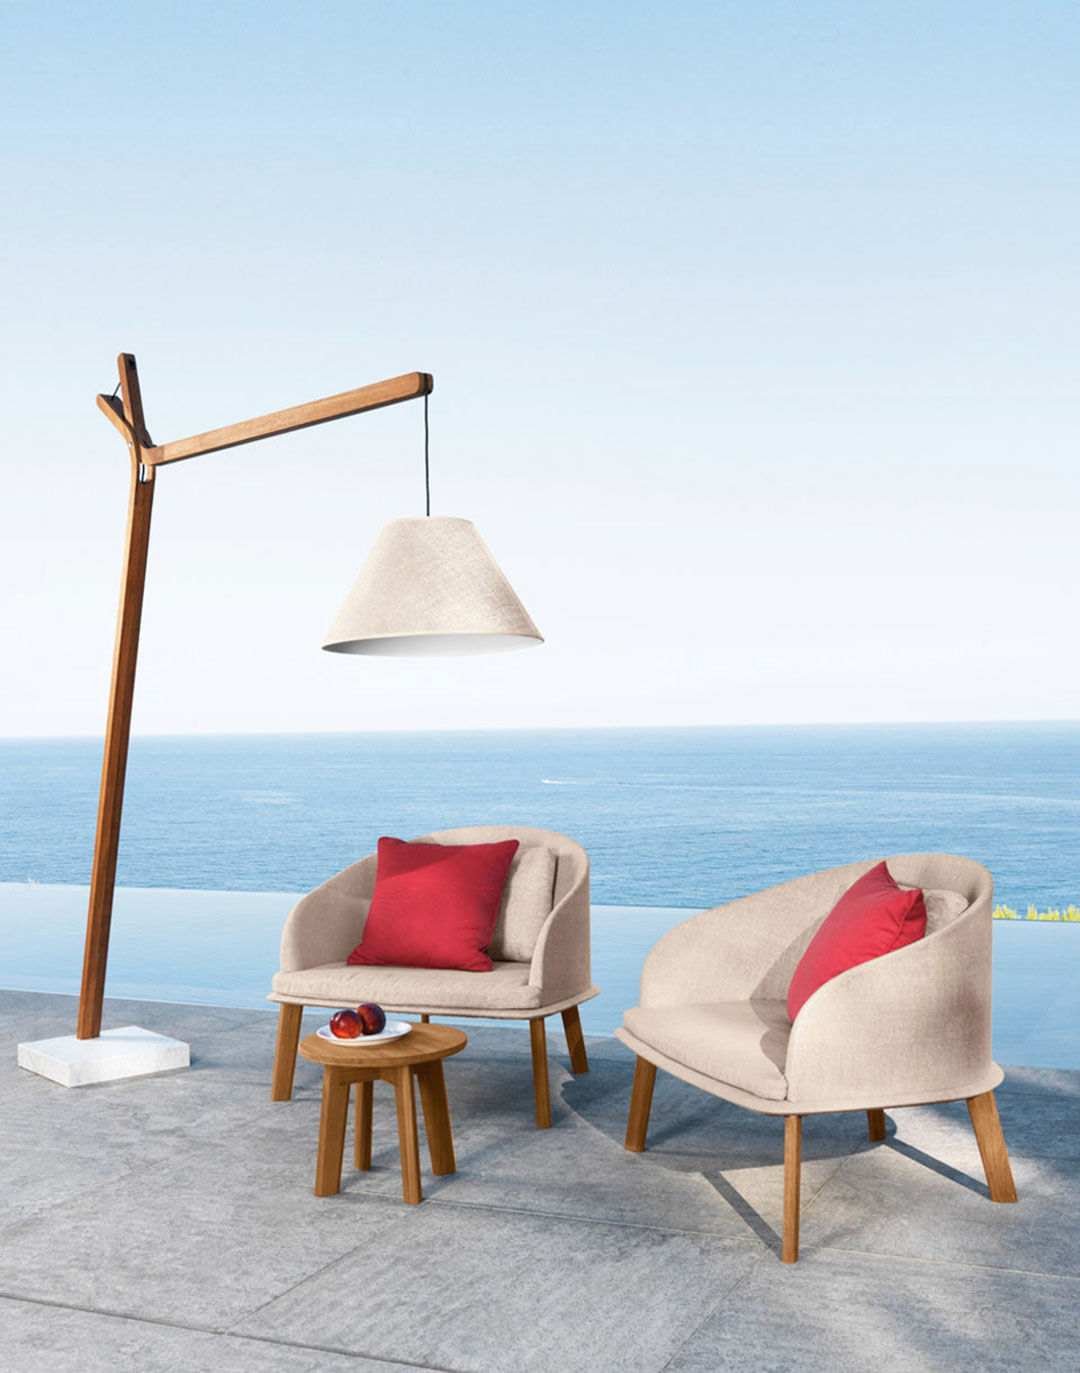 <p><strong>Talenti.</strong><br />
Outdoor living collection</p>